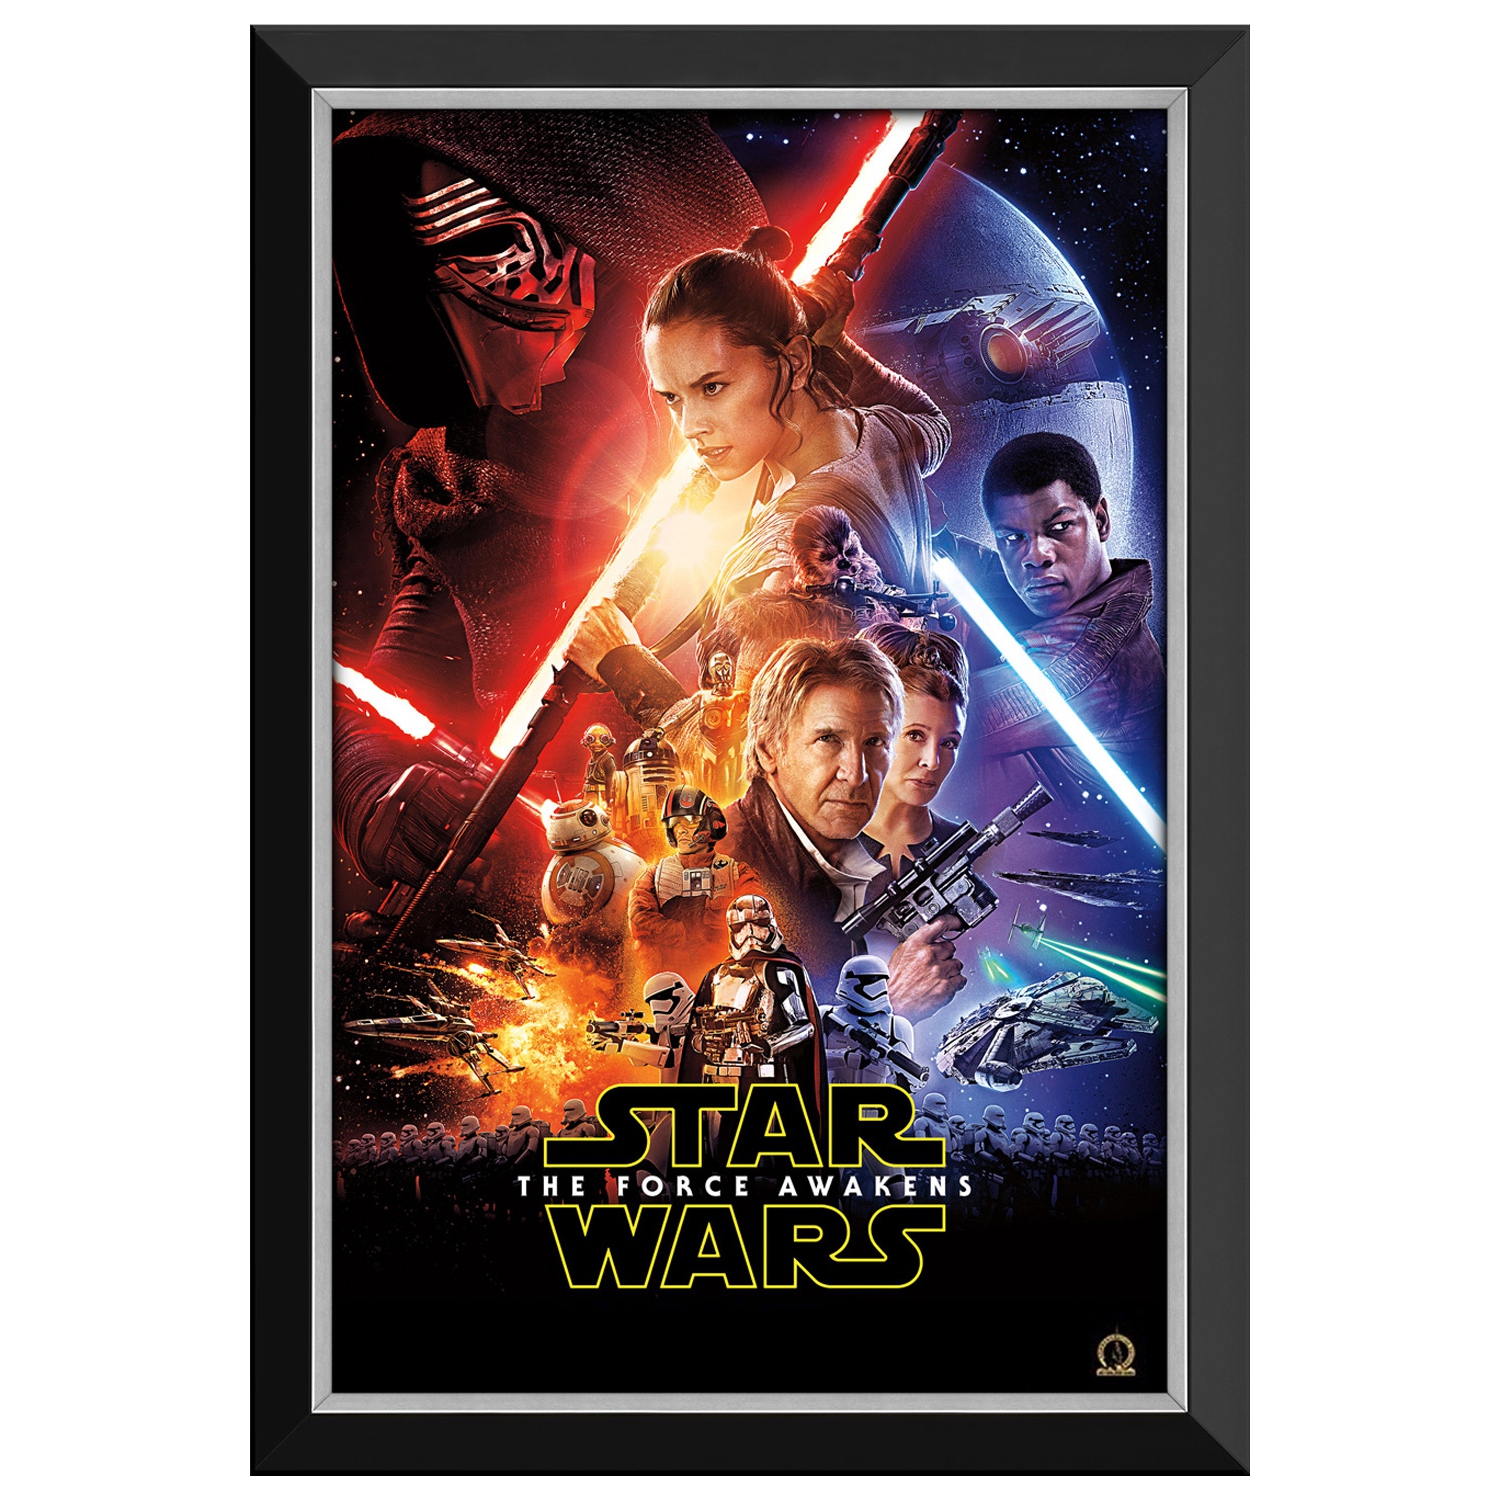 Star Wars Ep VII The Force Awakens - Movie Poster Reprint